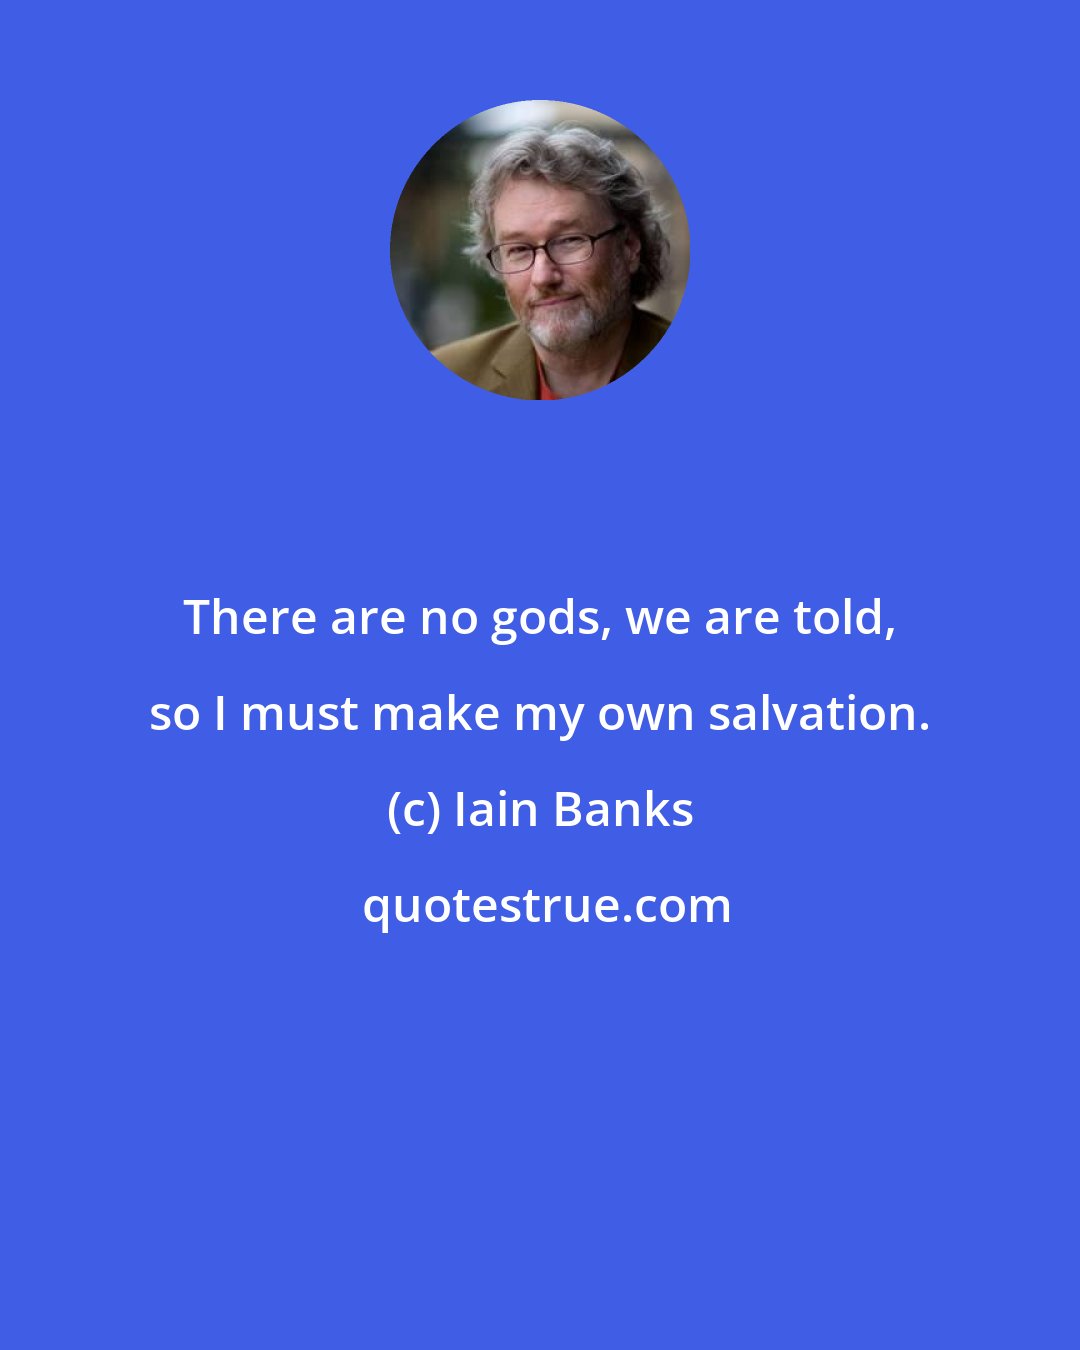 Iain Banks: There are no gods, we are told, so I must make my own salvation.